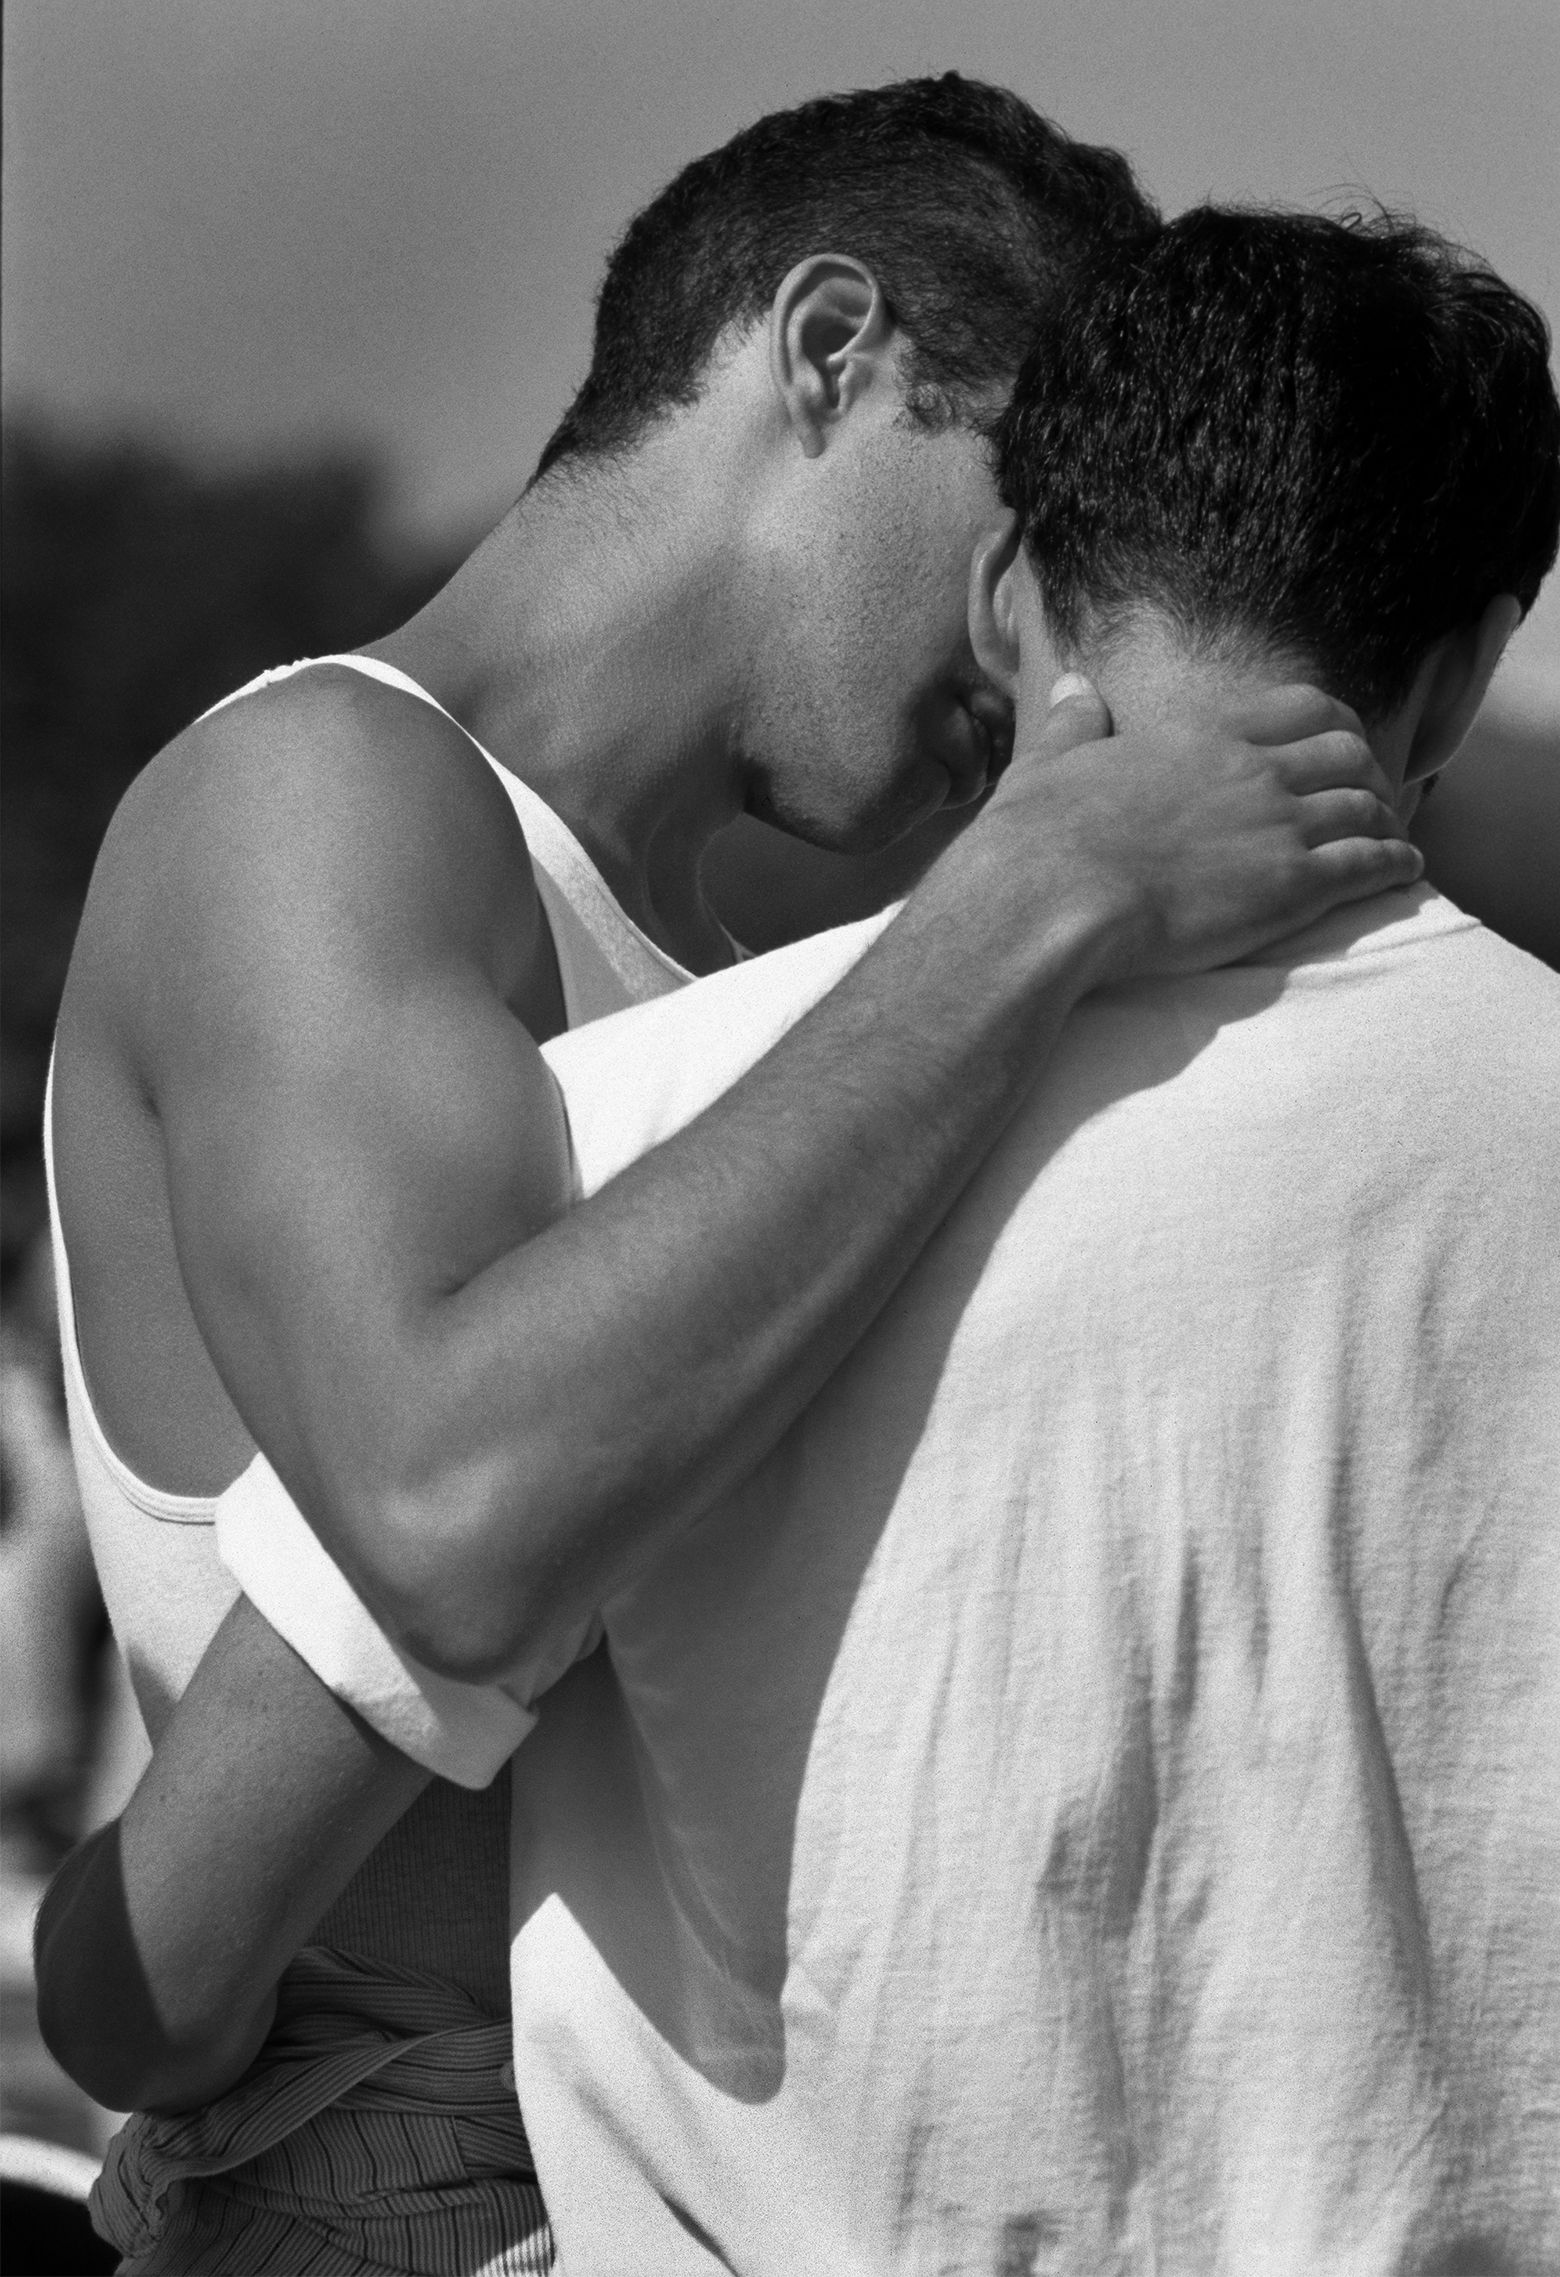 Two young men seen from the back at an angle stand closely together: one in a tank top with his hand cupped around the back of the other’s neck; one in a T-shirt with his arm around the other’s waist.